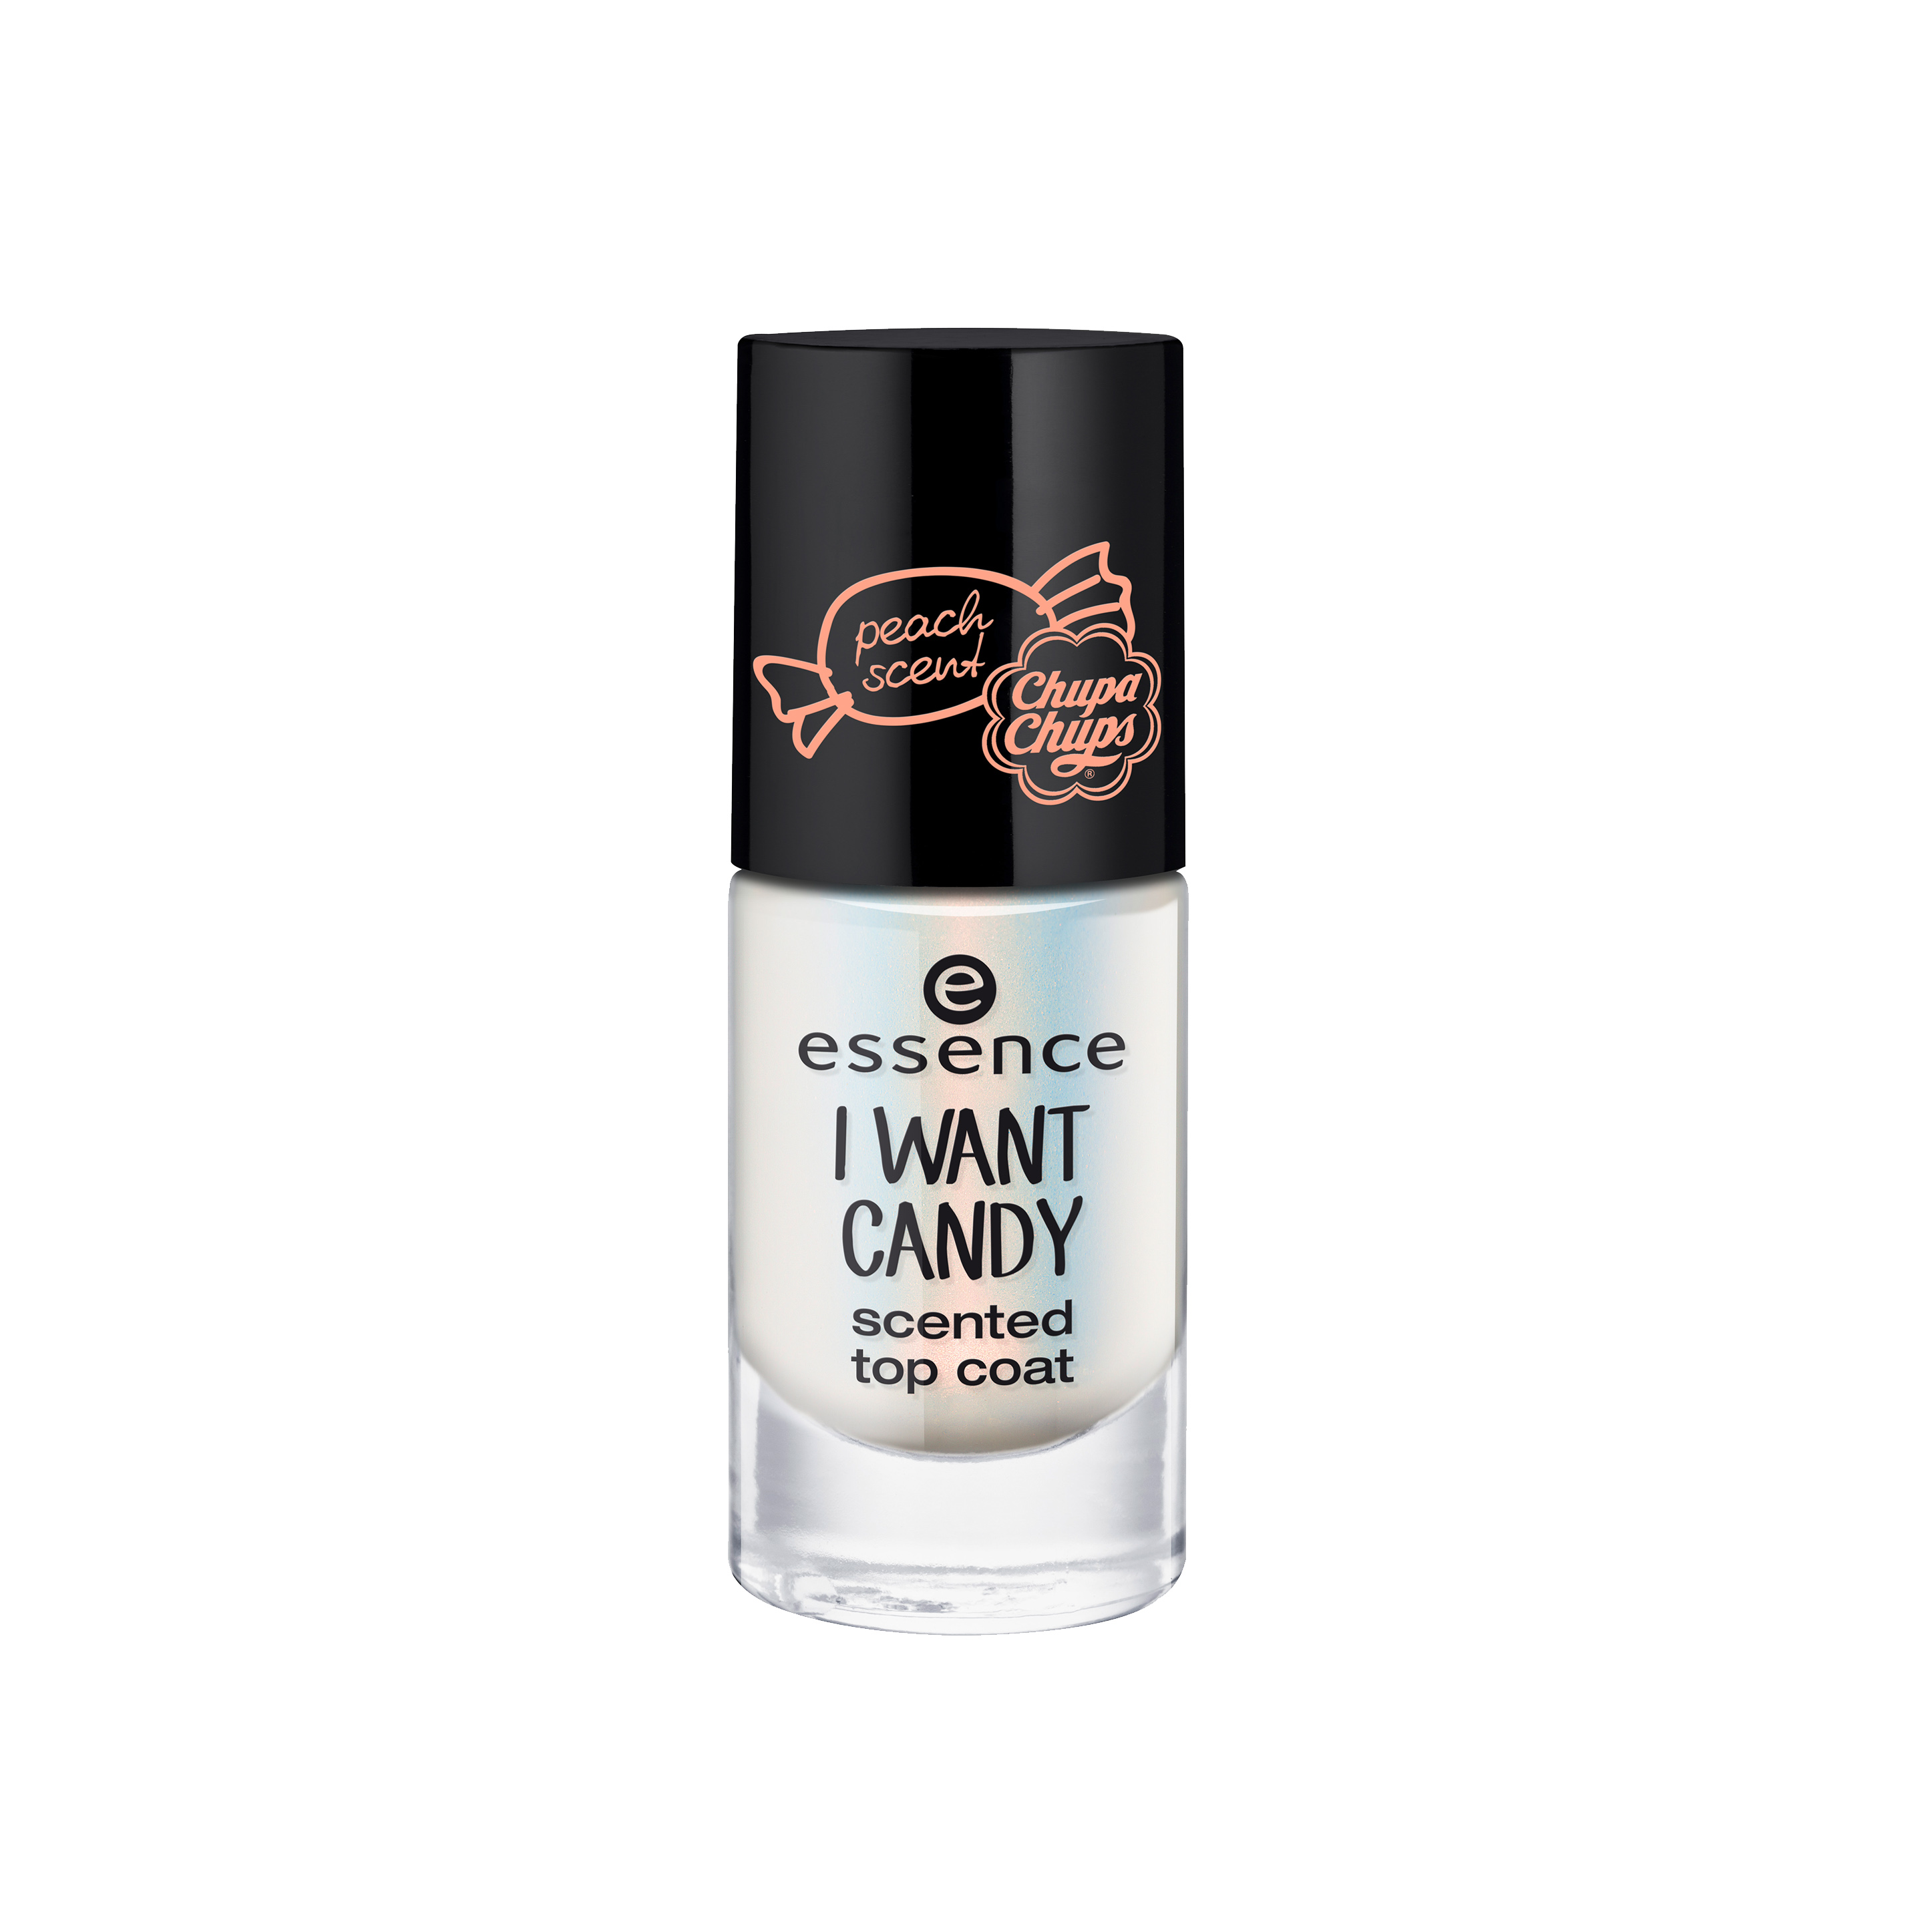 ess. i want candy scented top coat 01